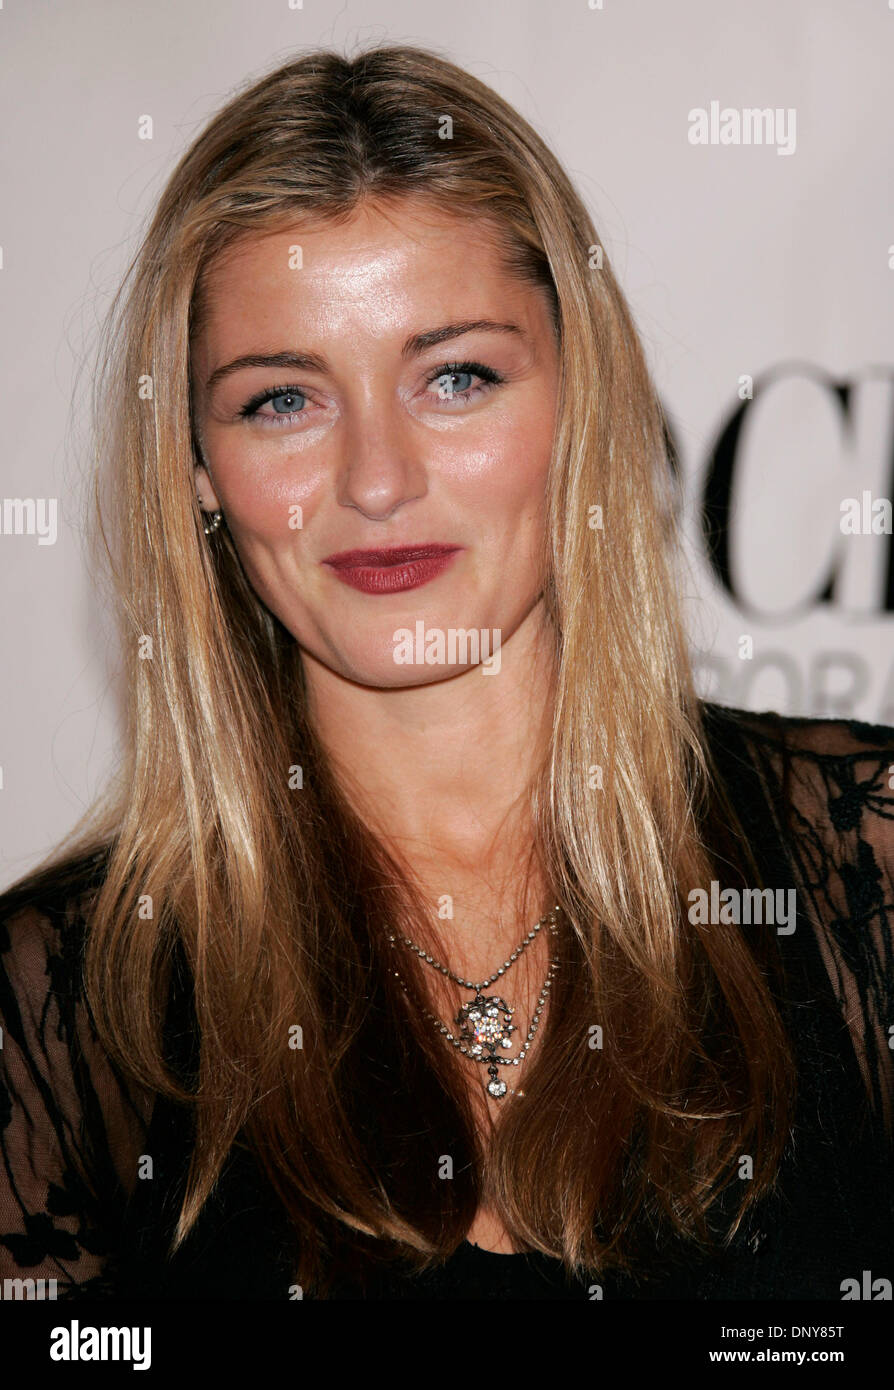 Jan 18, 2006; Pasadena, California, USA; Actress LOUISE LOMBARD at the CBS UPN SHOWTIME TCA Party held at the Wind Tunnel. Mandatory Credit: Photo by Lisa O'Connor/ZUMA Press. (©) Copyright 2006 by Lisa O'Connor Stock Photo